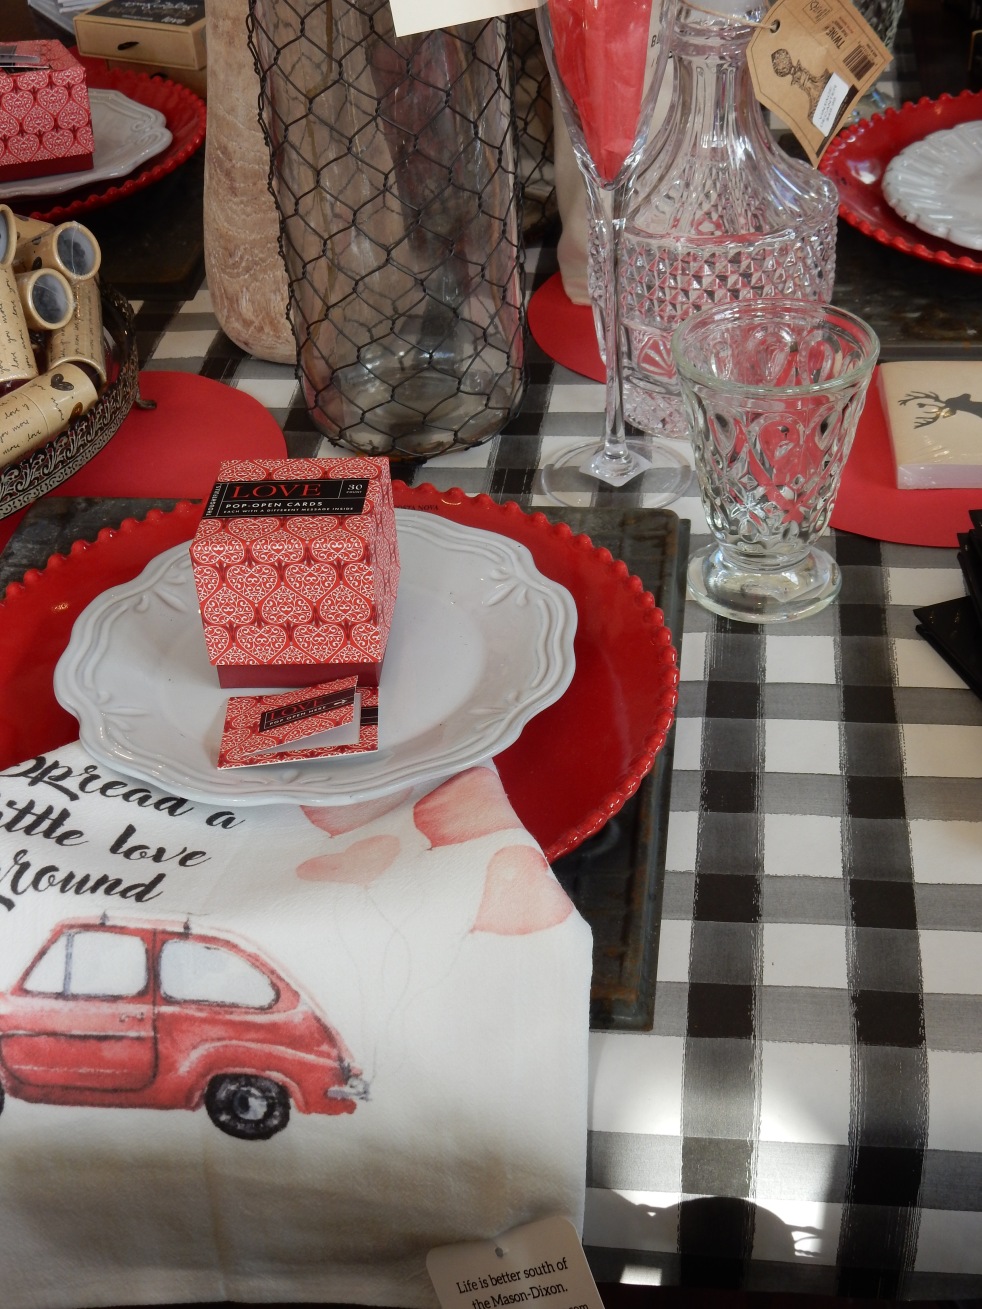 Dining Decor, Table of Love, Valentine's Day Decorating, Valentine's Decor, Sarah In Style, Sarah Meyer, interior decorating, tablescape, decorating ideas, table ideas, February table, decorating blog, decorating blogger, Rusted Arrow Mercantile, Pensacola Shops, Hester & Cook